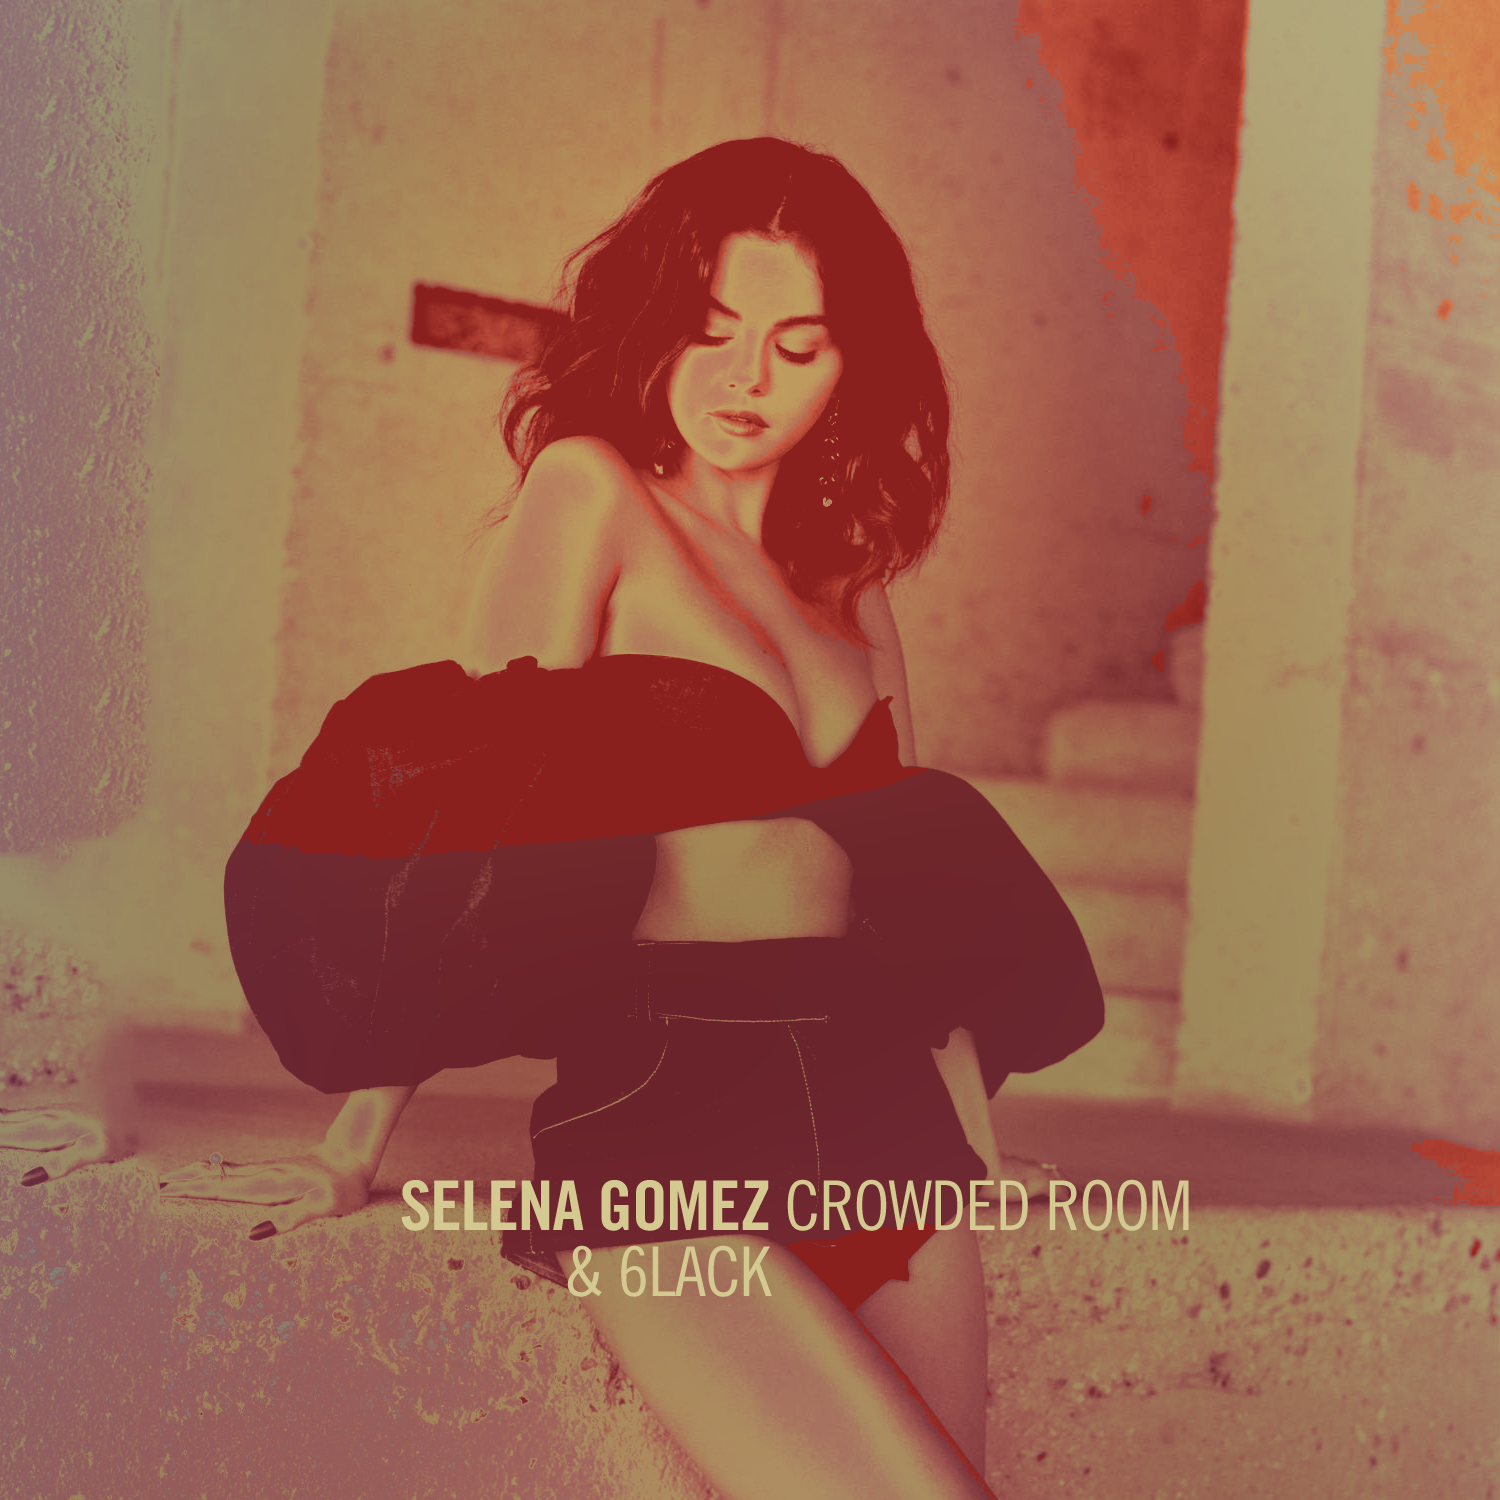 Selena Gomez & 6LACK - Crowded Room (Fanmade Cover)